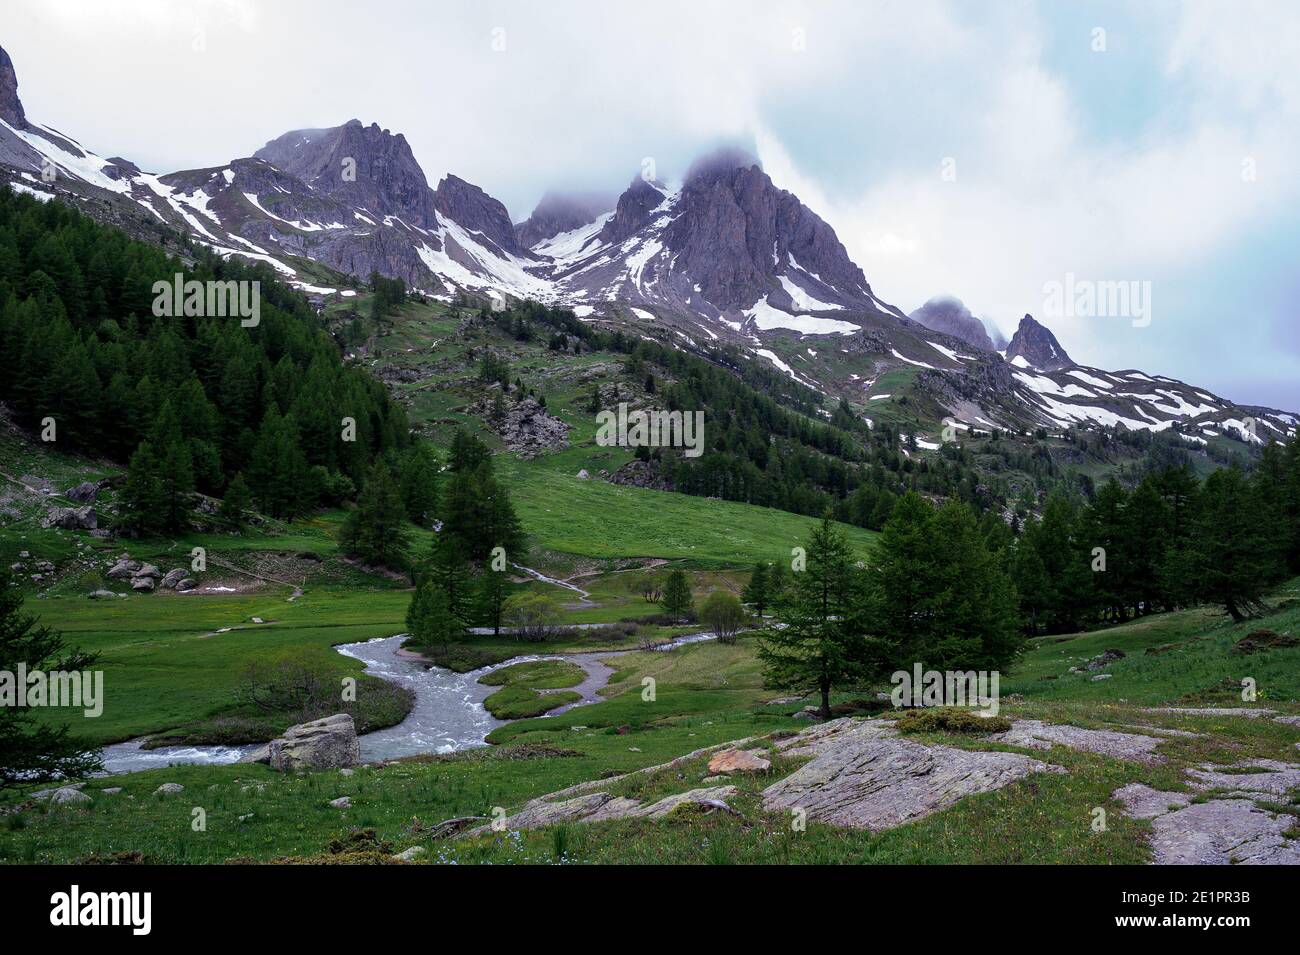 Mountain landscape with a river flowing at the bottom of a valley. In the background, a few clouds veil the mountain tops. Stock Photo